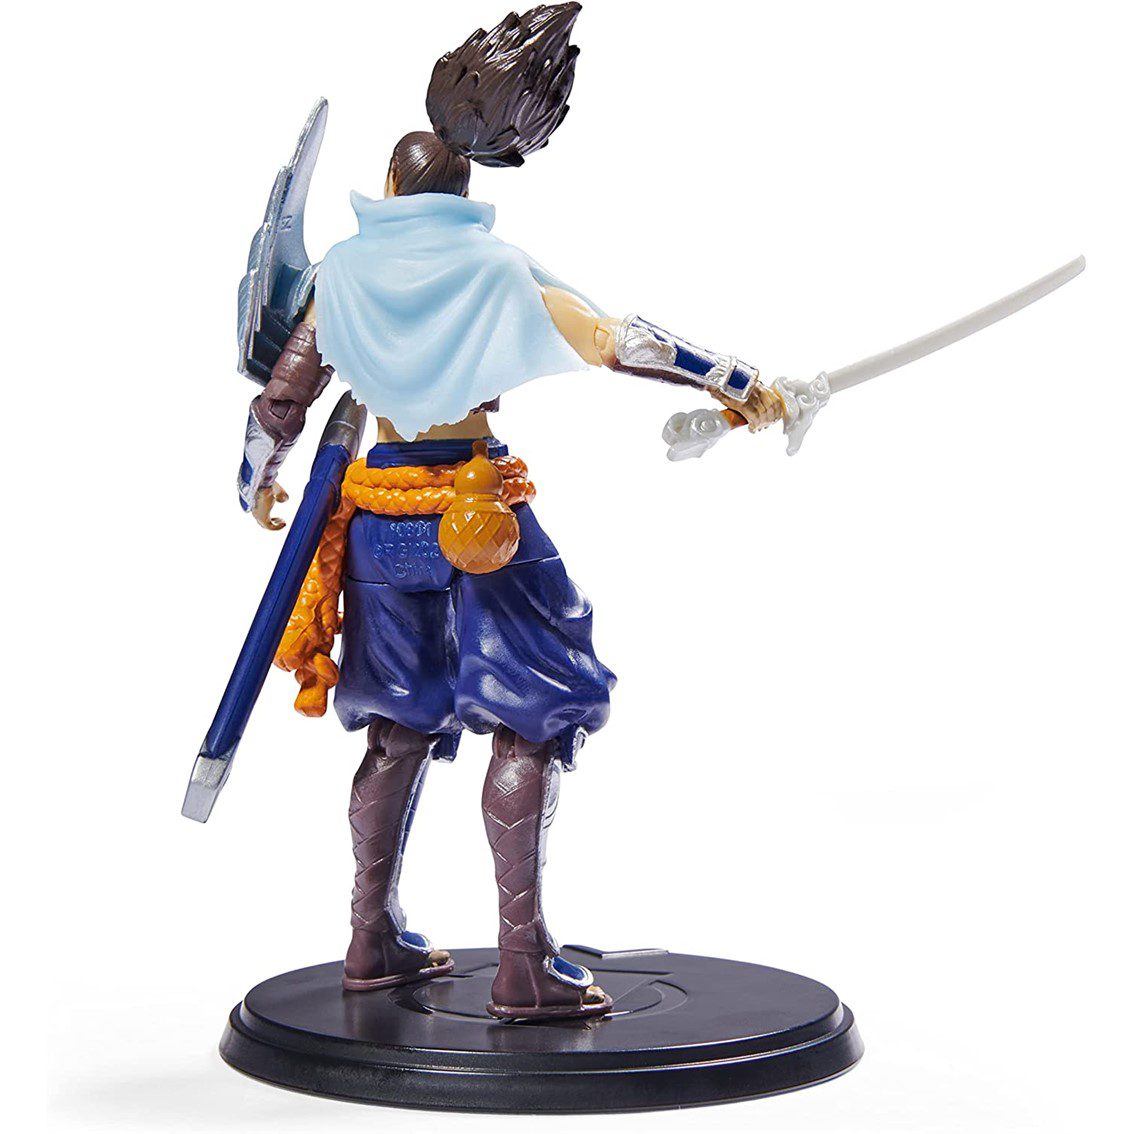 778988384992-PN-6062259-Cod.-Articulo-MGS0000014504-Figura-league-of-legends-the-champion-collection-yasuo-2